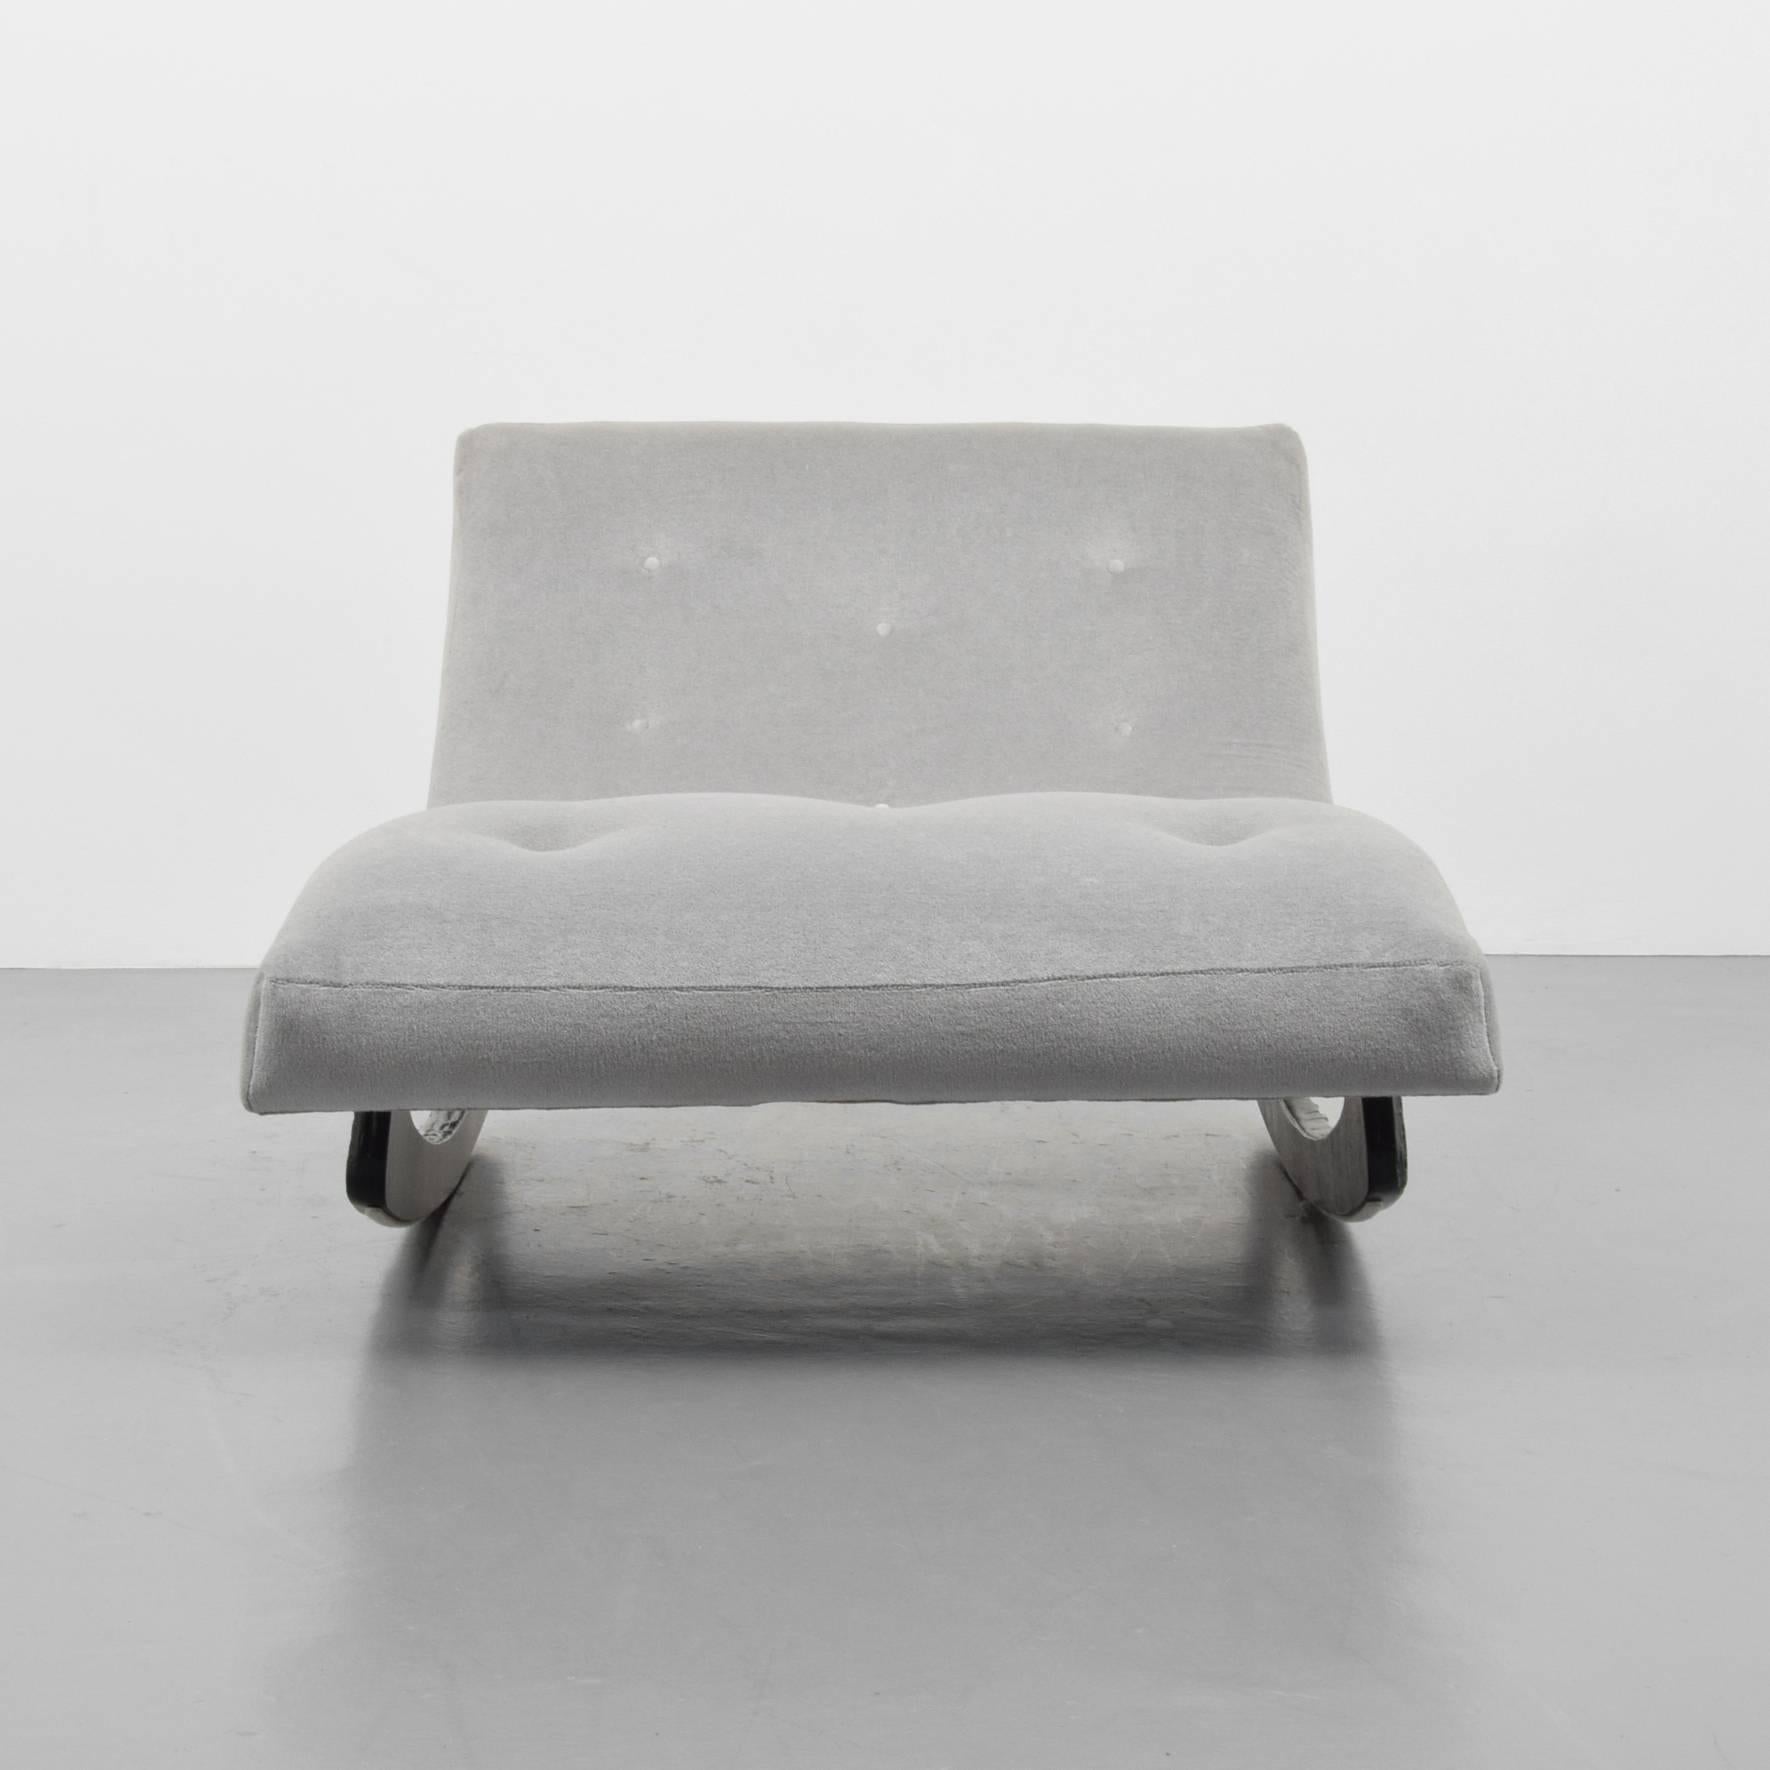 American Adrian Pearsall Brutalist Rocking Lounge/Chaise Lounge Chair, 1960s, USA